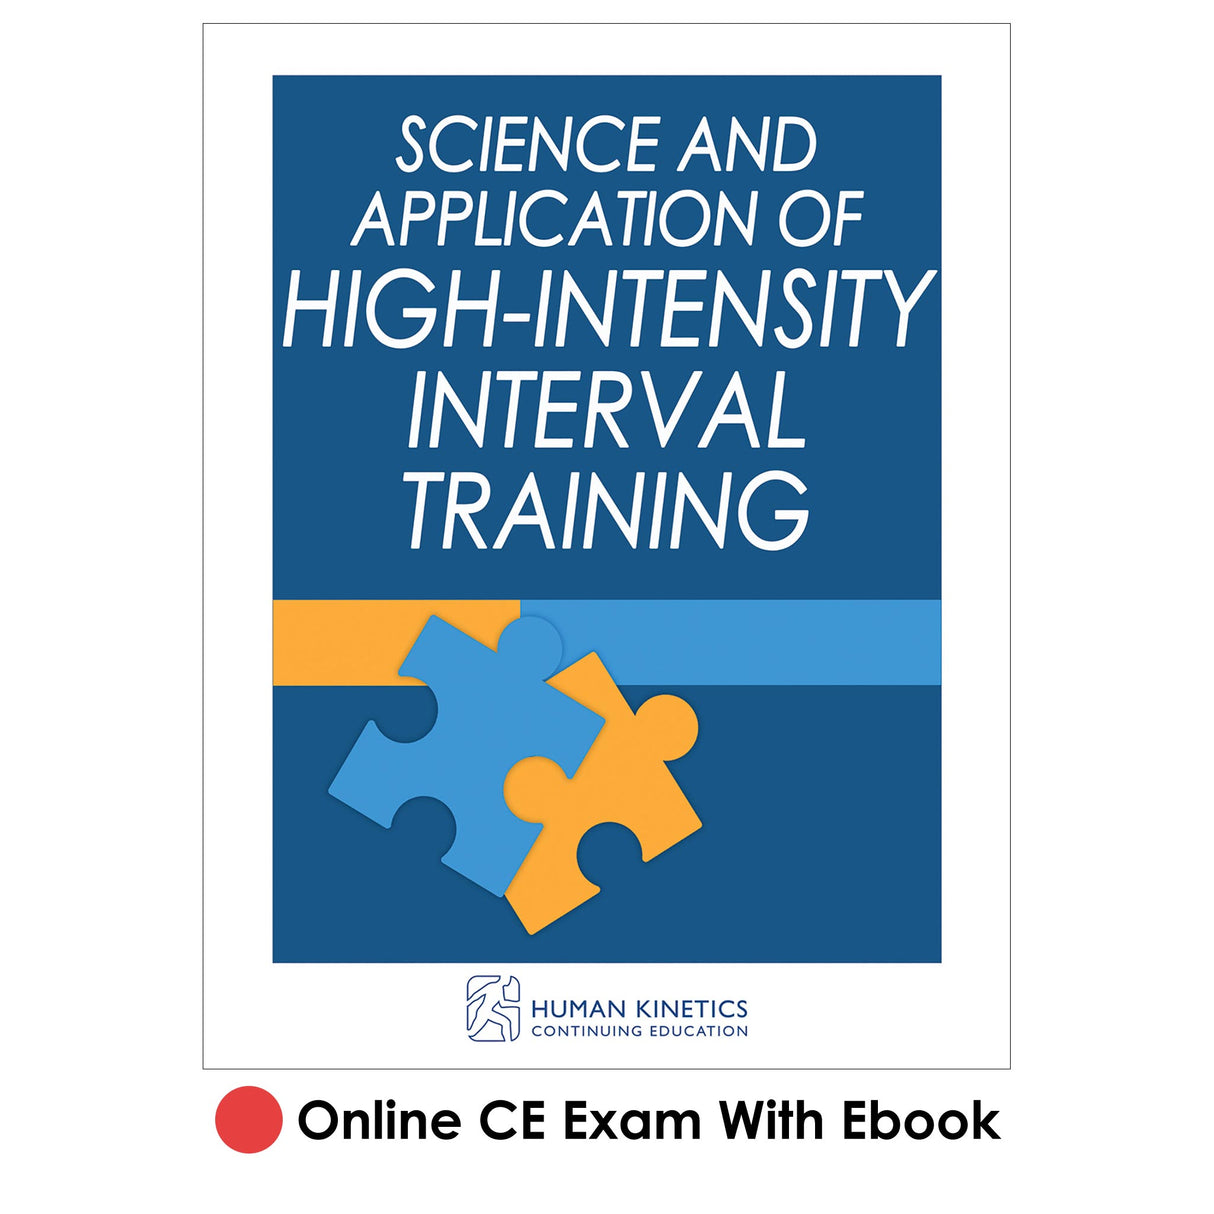 Science and Application of High-Intensity Interval Training Online CE Exam With Ebook